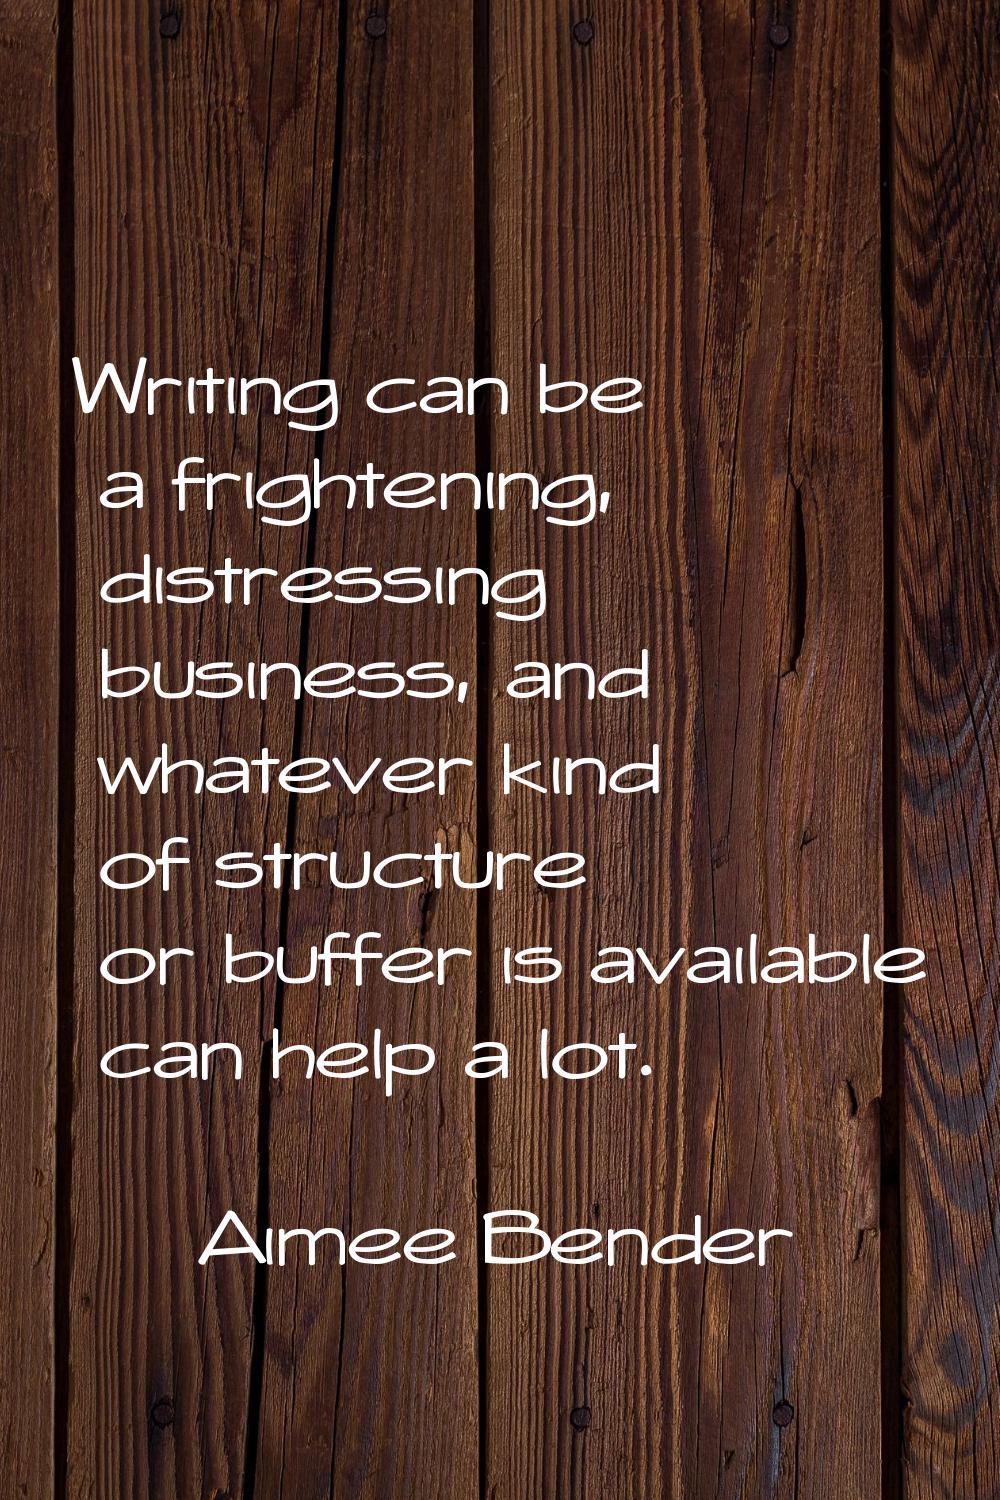 Writing can be a frightening, distressing business, and whatever kind of structure or buffer is ava